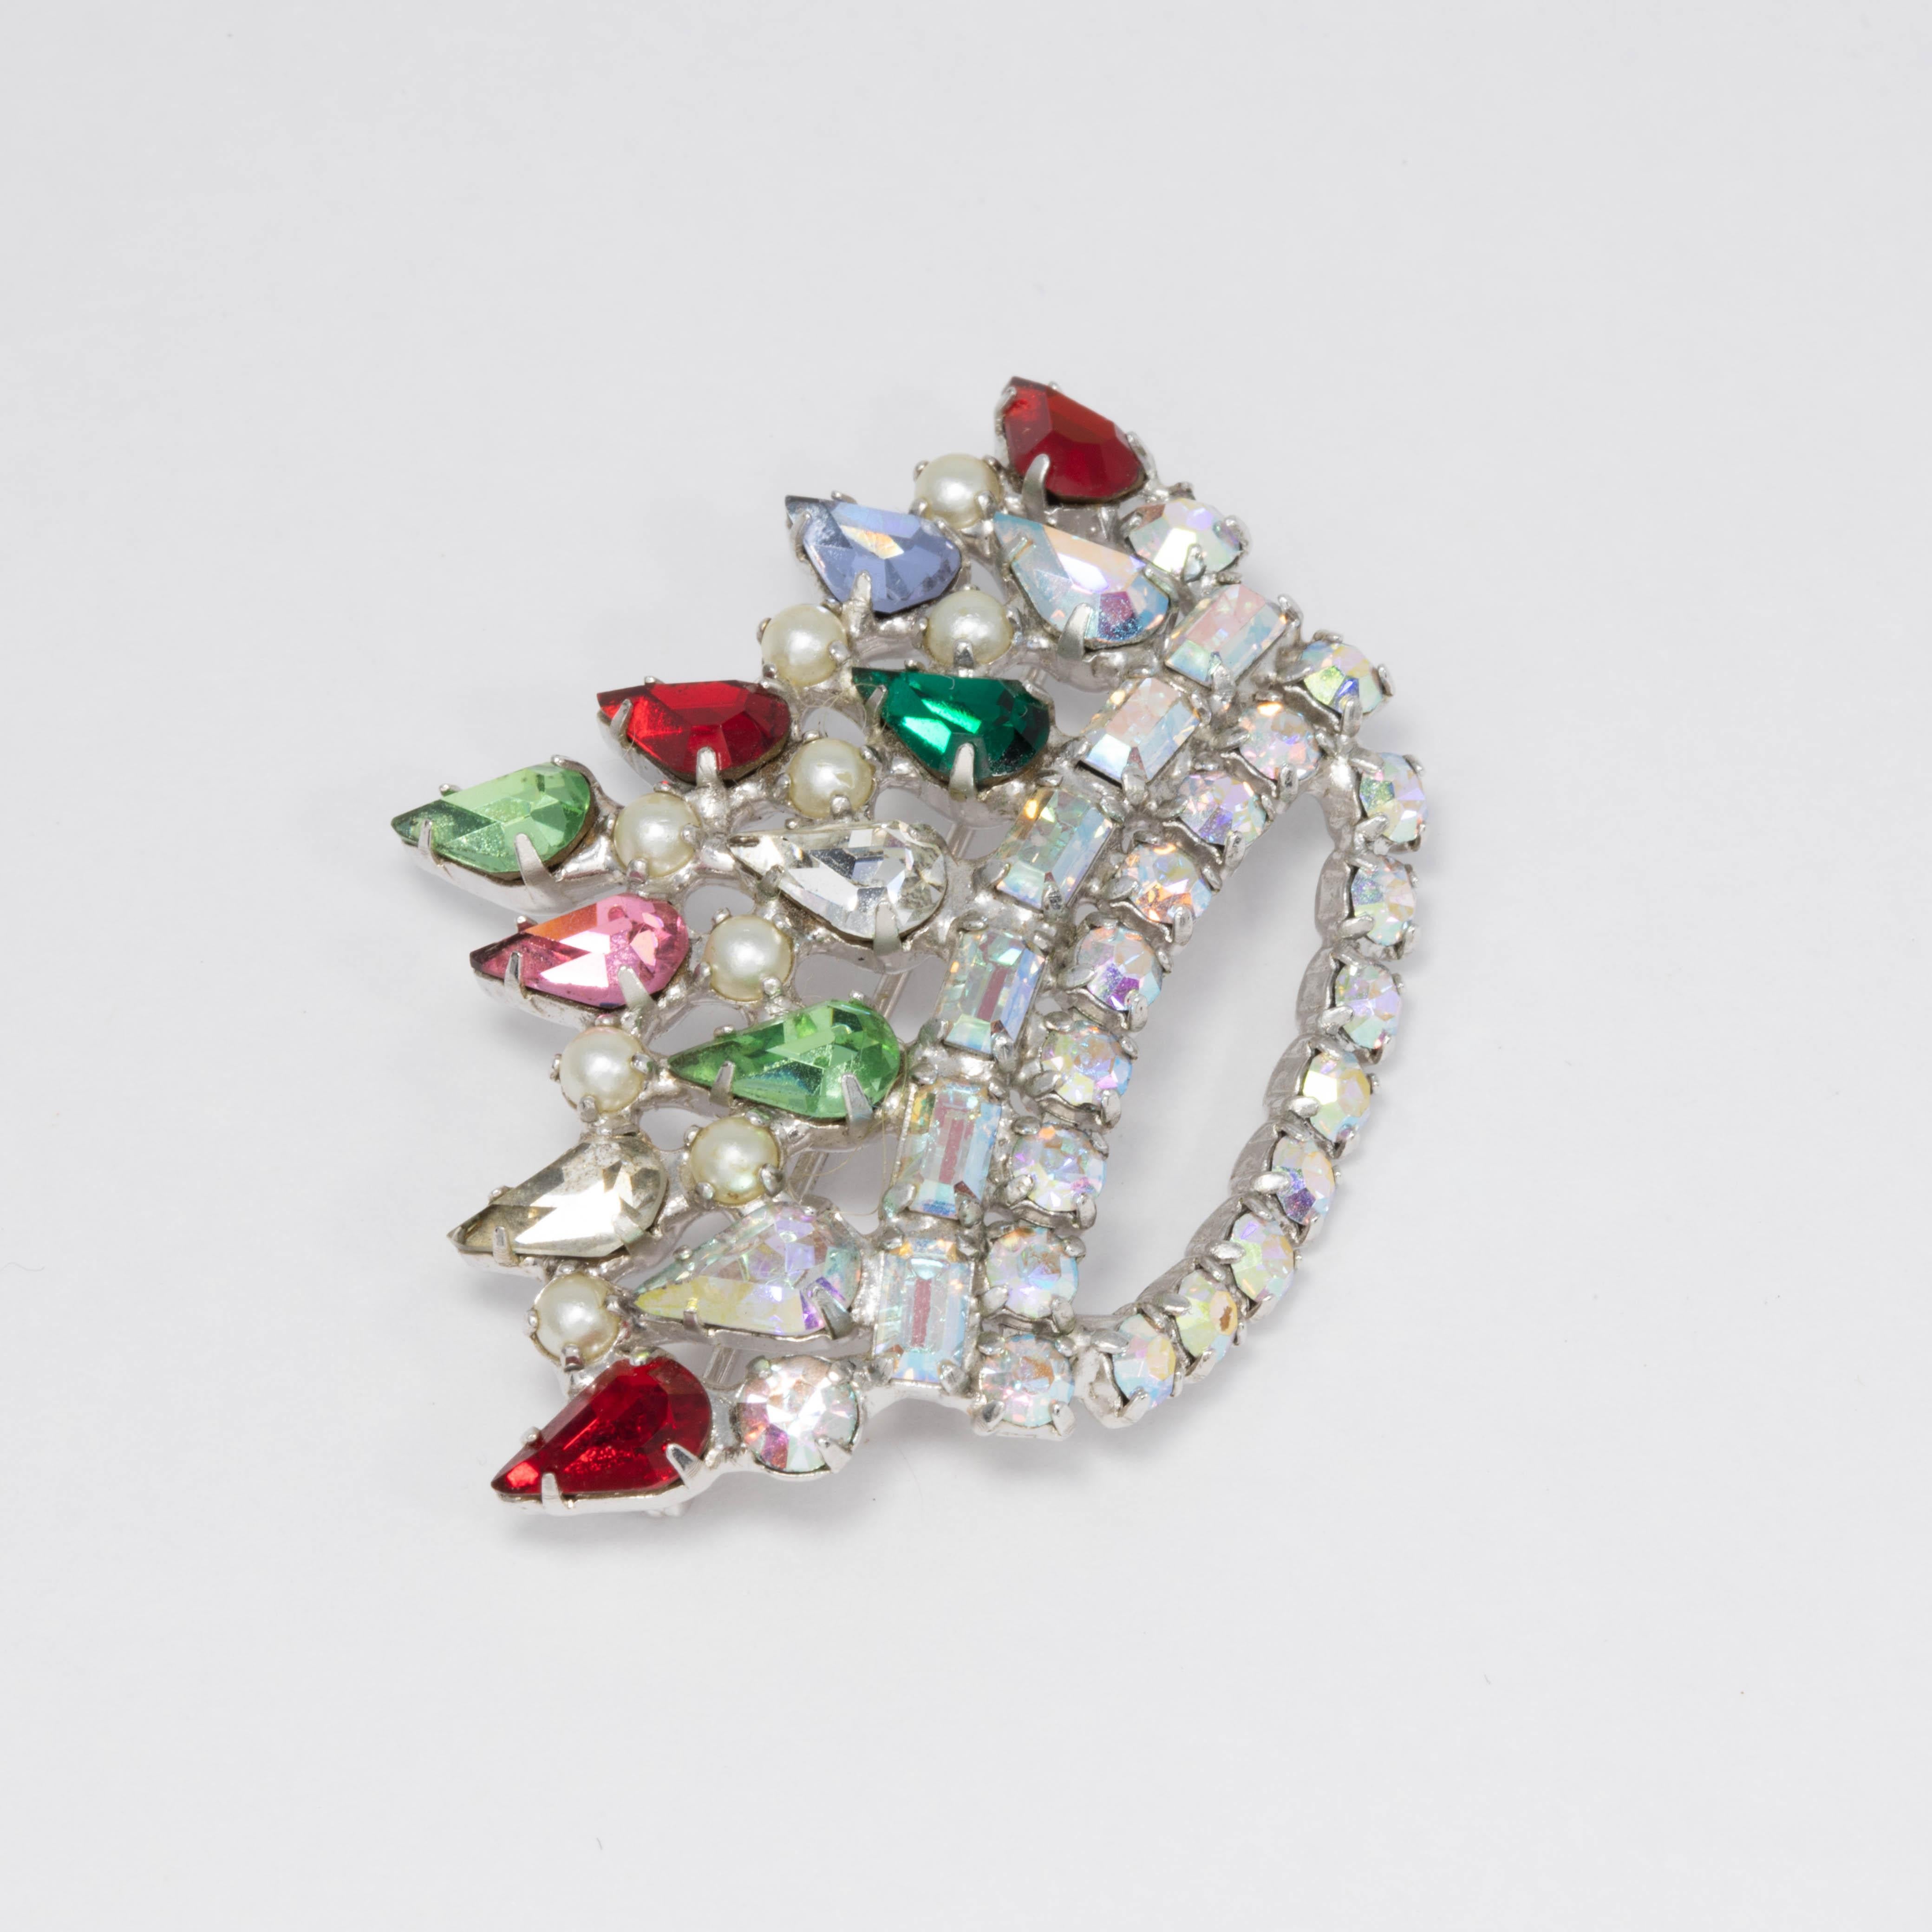 A luxurious crown fit for royalty! This silvertone pin brooch is decorated with clear, rose, ruby, emerald, and aurora borealis crystals & faux pearls for a truly regal look.

Signed L David